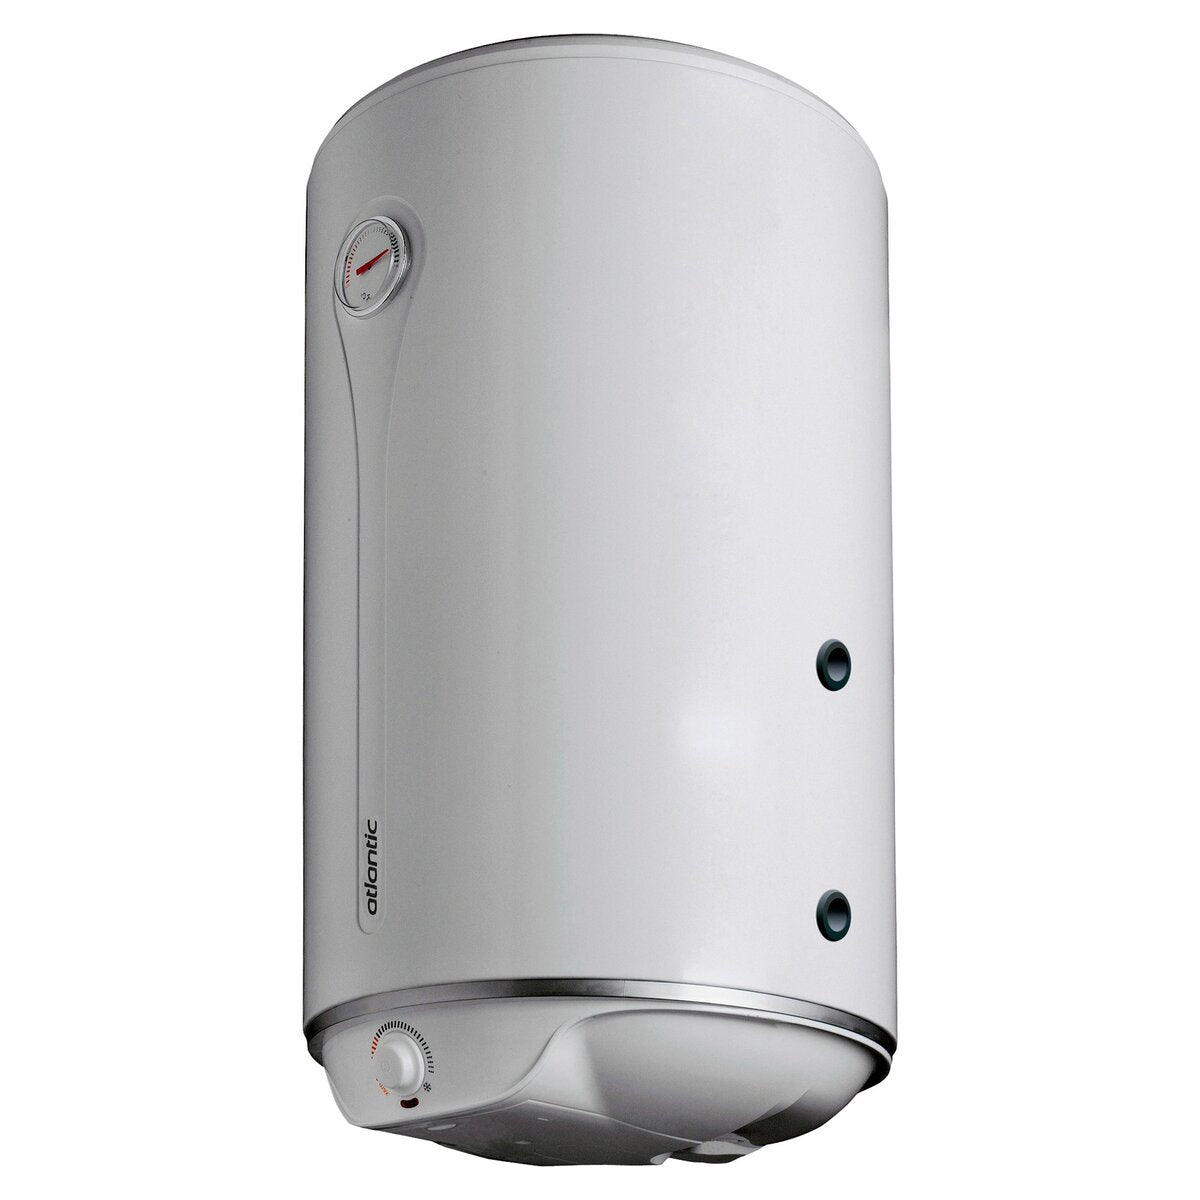 Atlantic Combi MG 80 vertical thermo-electric water heater right connections 80 liters 2 year warranty